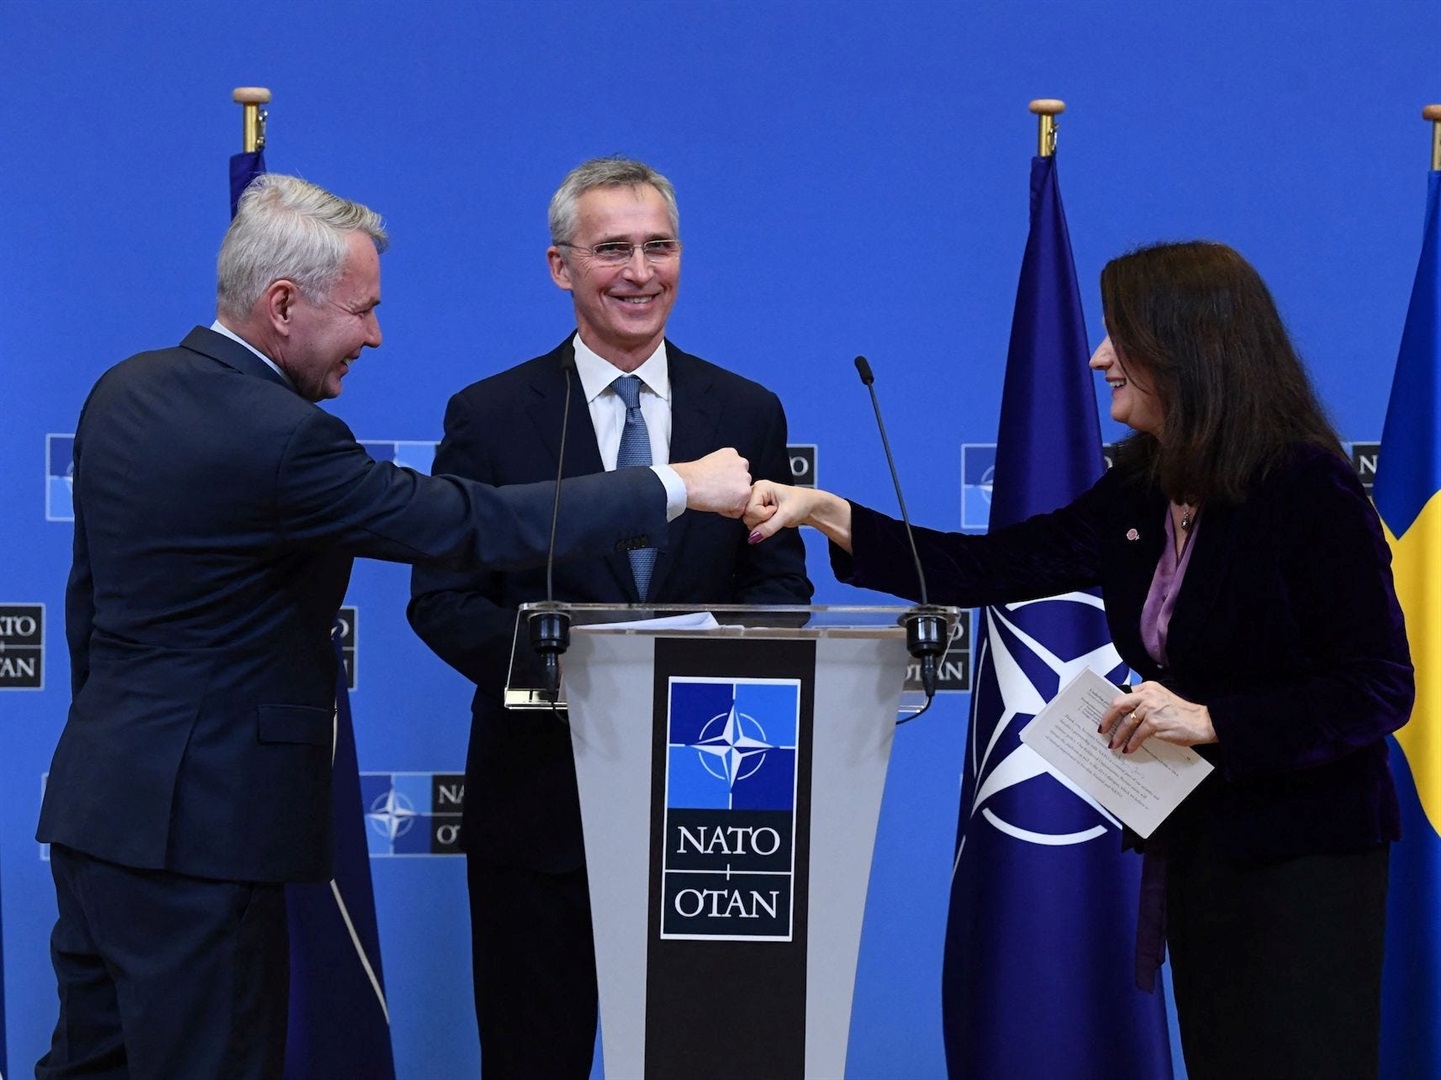 NATO Secretary General Jens Stoltenberg, centre, looks on as Finnish Minister for Foreign Affairs Pekka Haavisto, left, and Swedish Foreign Minister Ann Linde bump fists after a press conference at NATO headquarters in Brussels in January. JOHN THYS/AFP via Getty Images